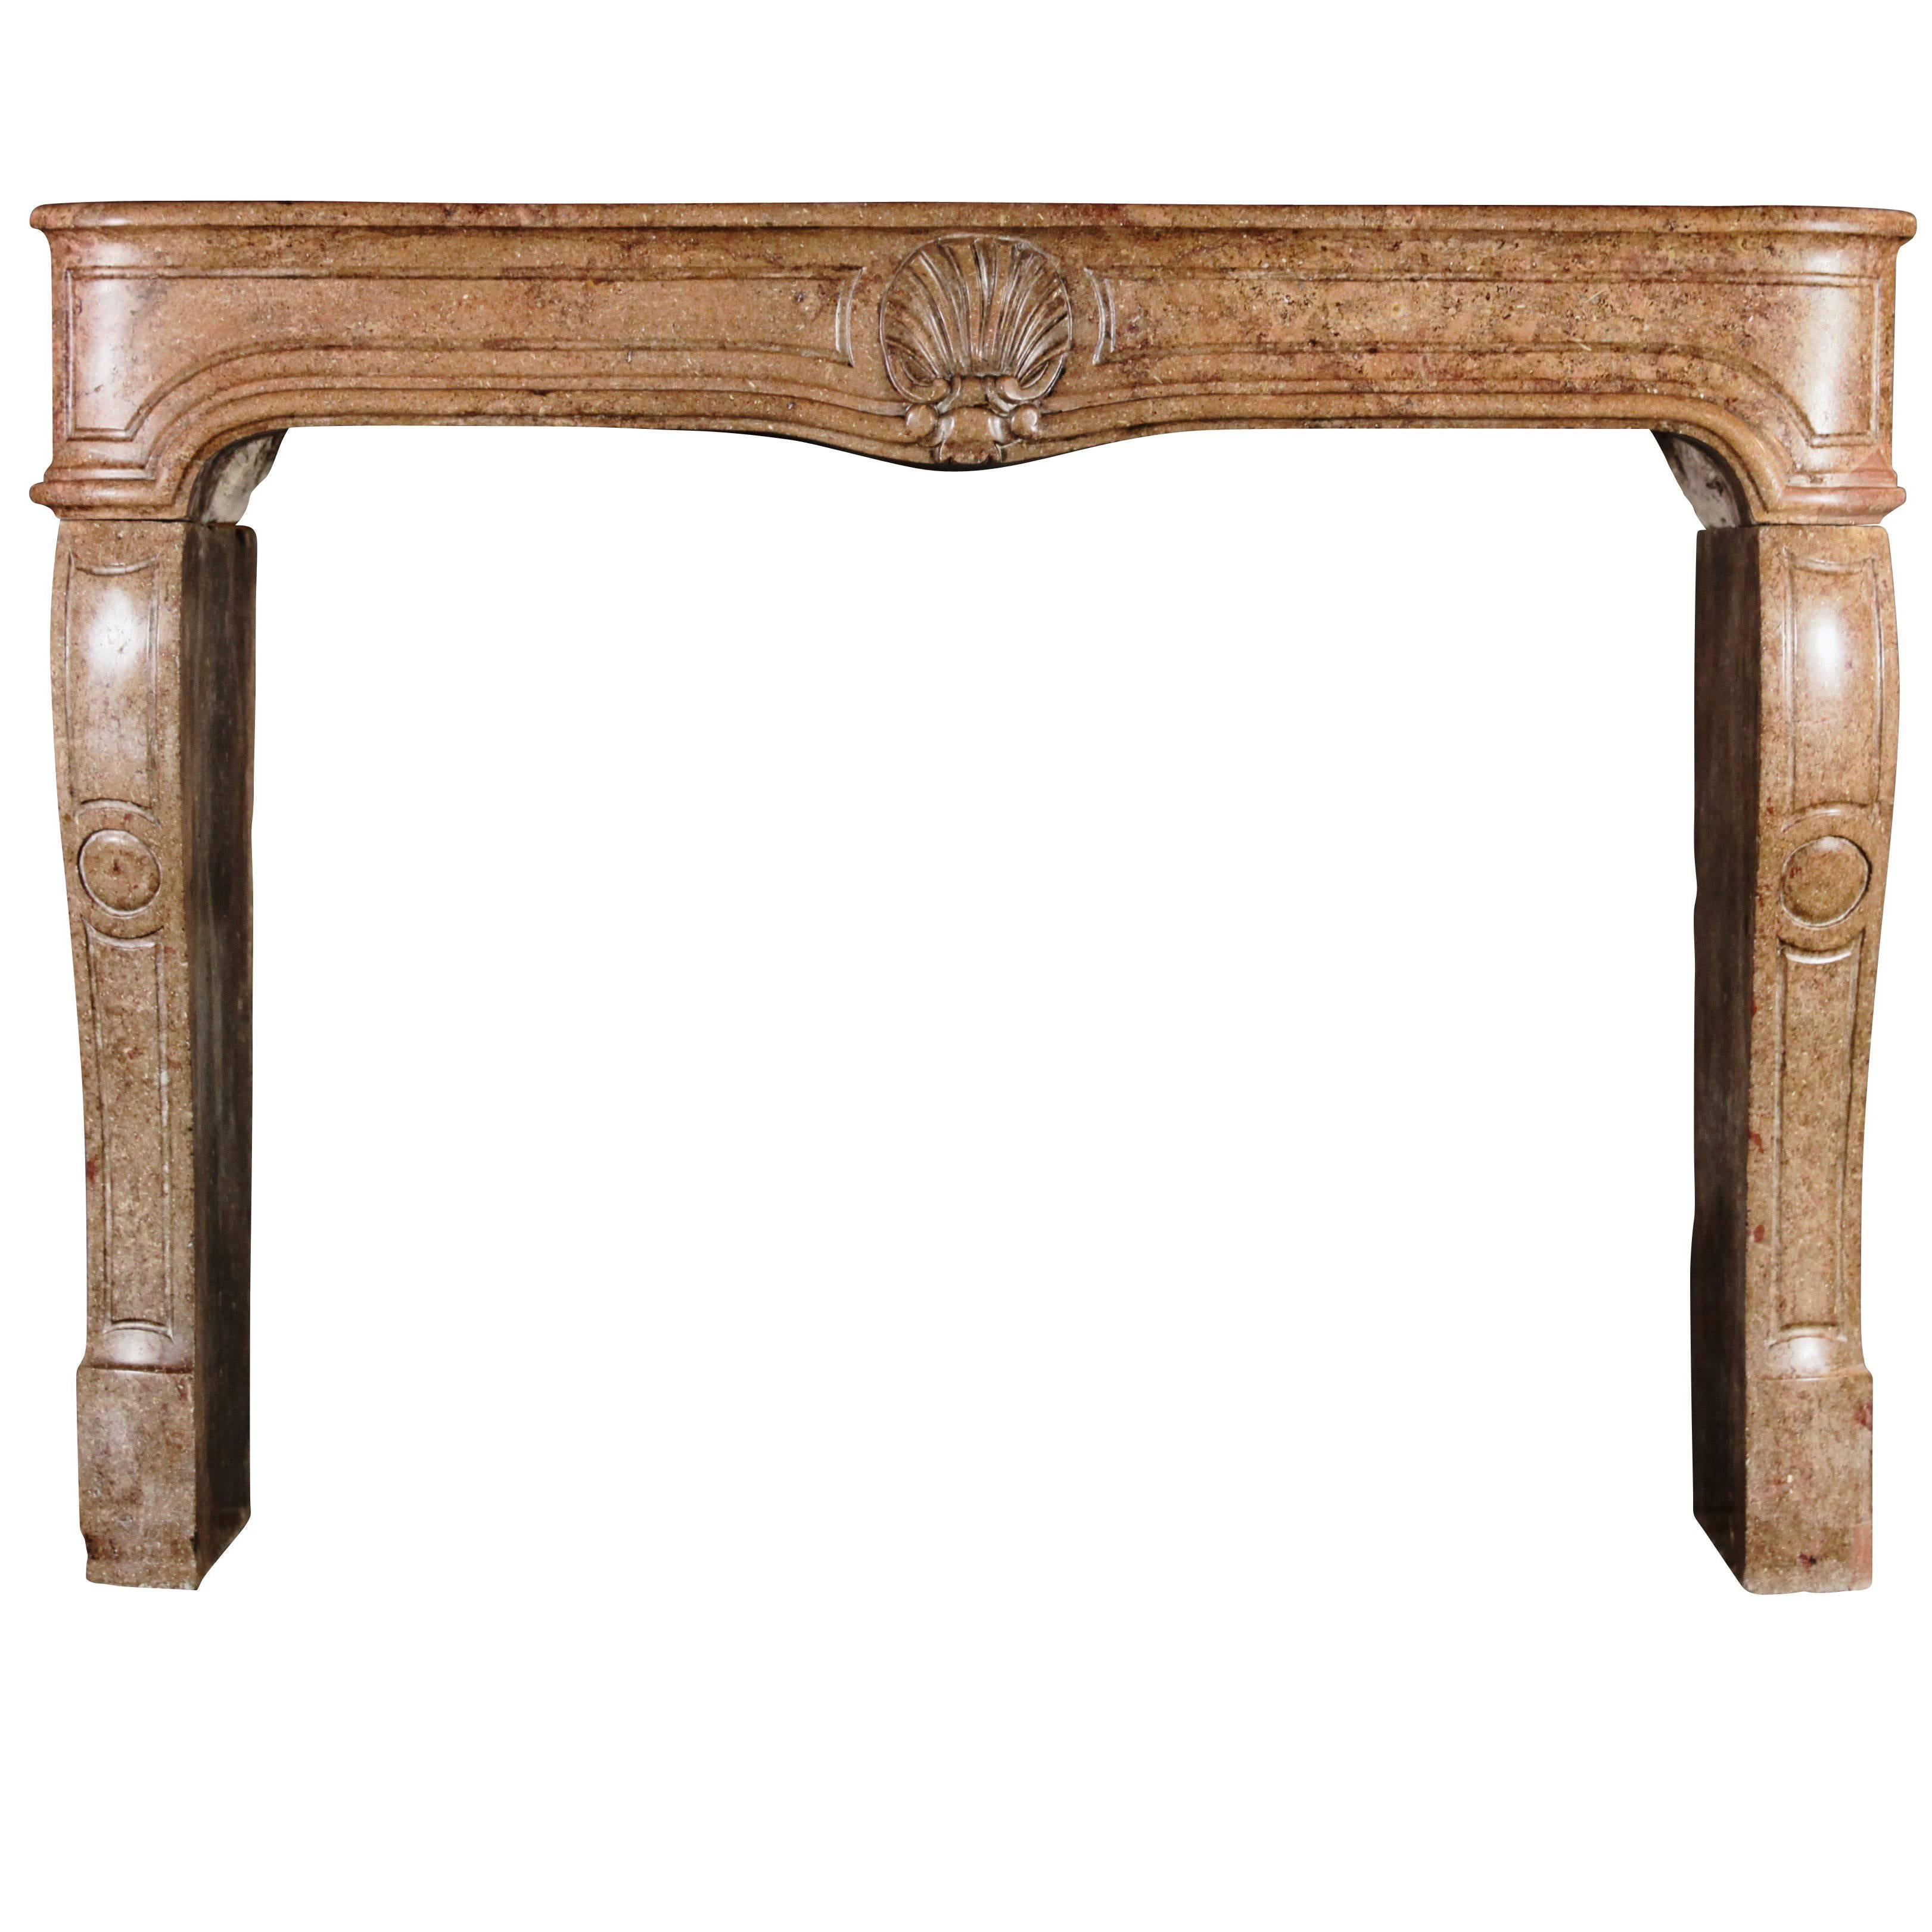 18th Century Burgundy Hardstone Antique Fireplace Mantel For Sale